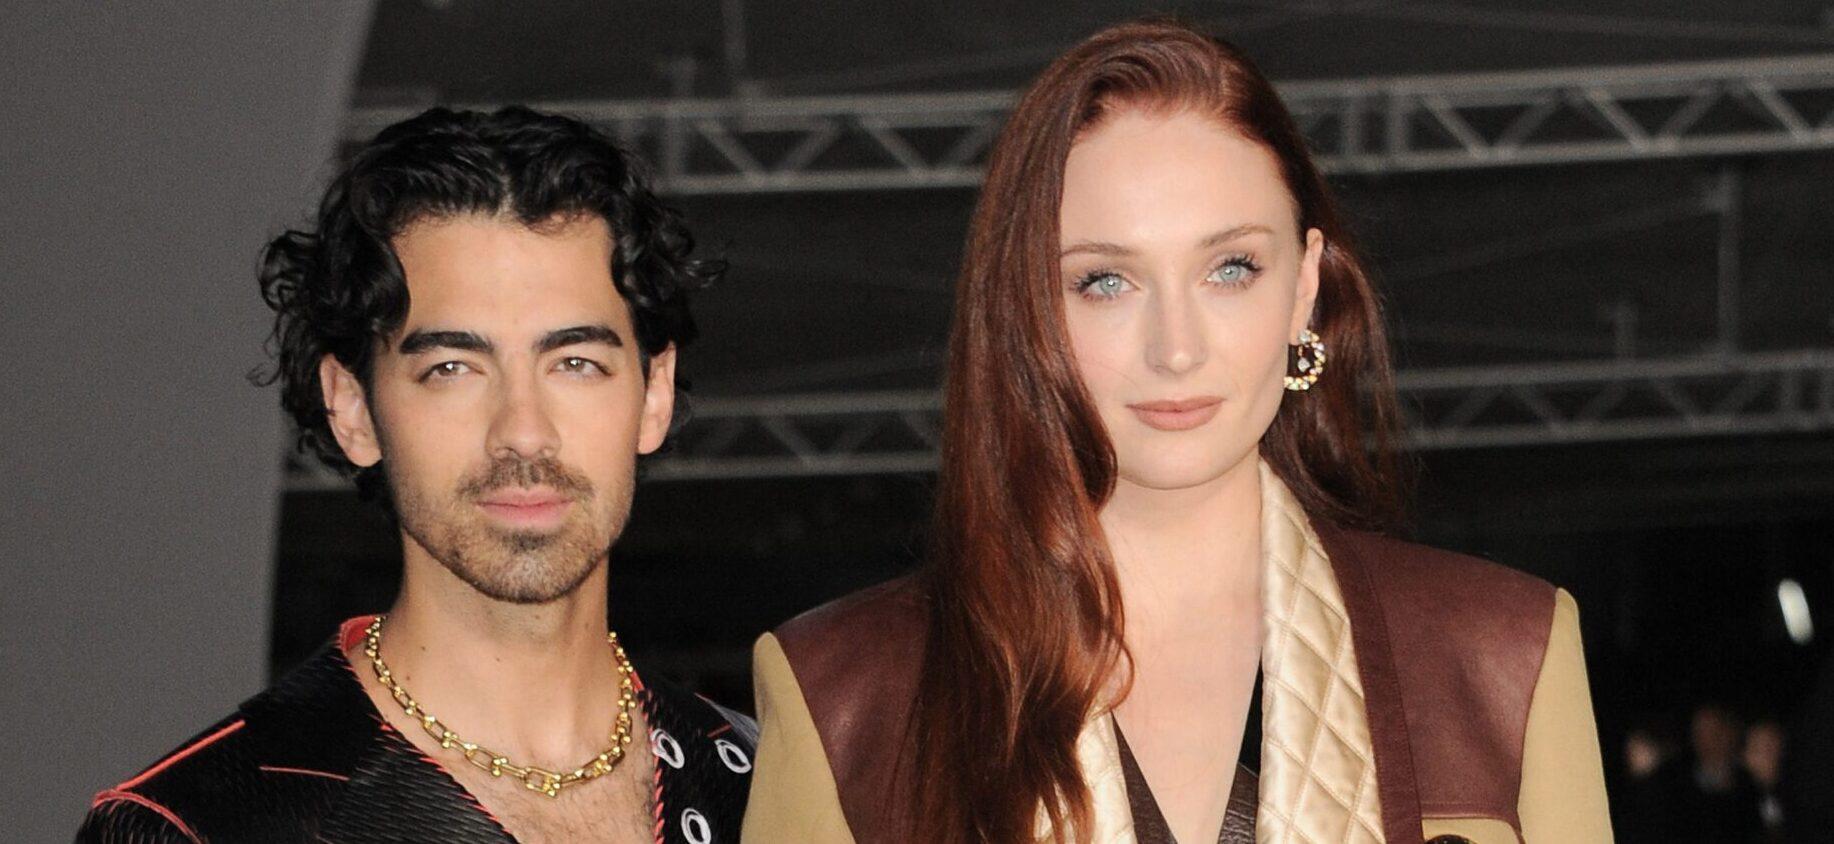 Joe Jonas Subtly References ‘Crazy’ Divorce From Sophie Turner During A Jonas Brothers Concert